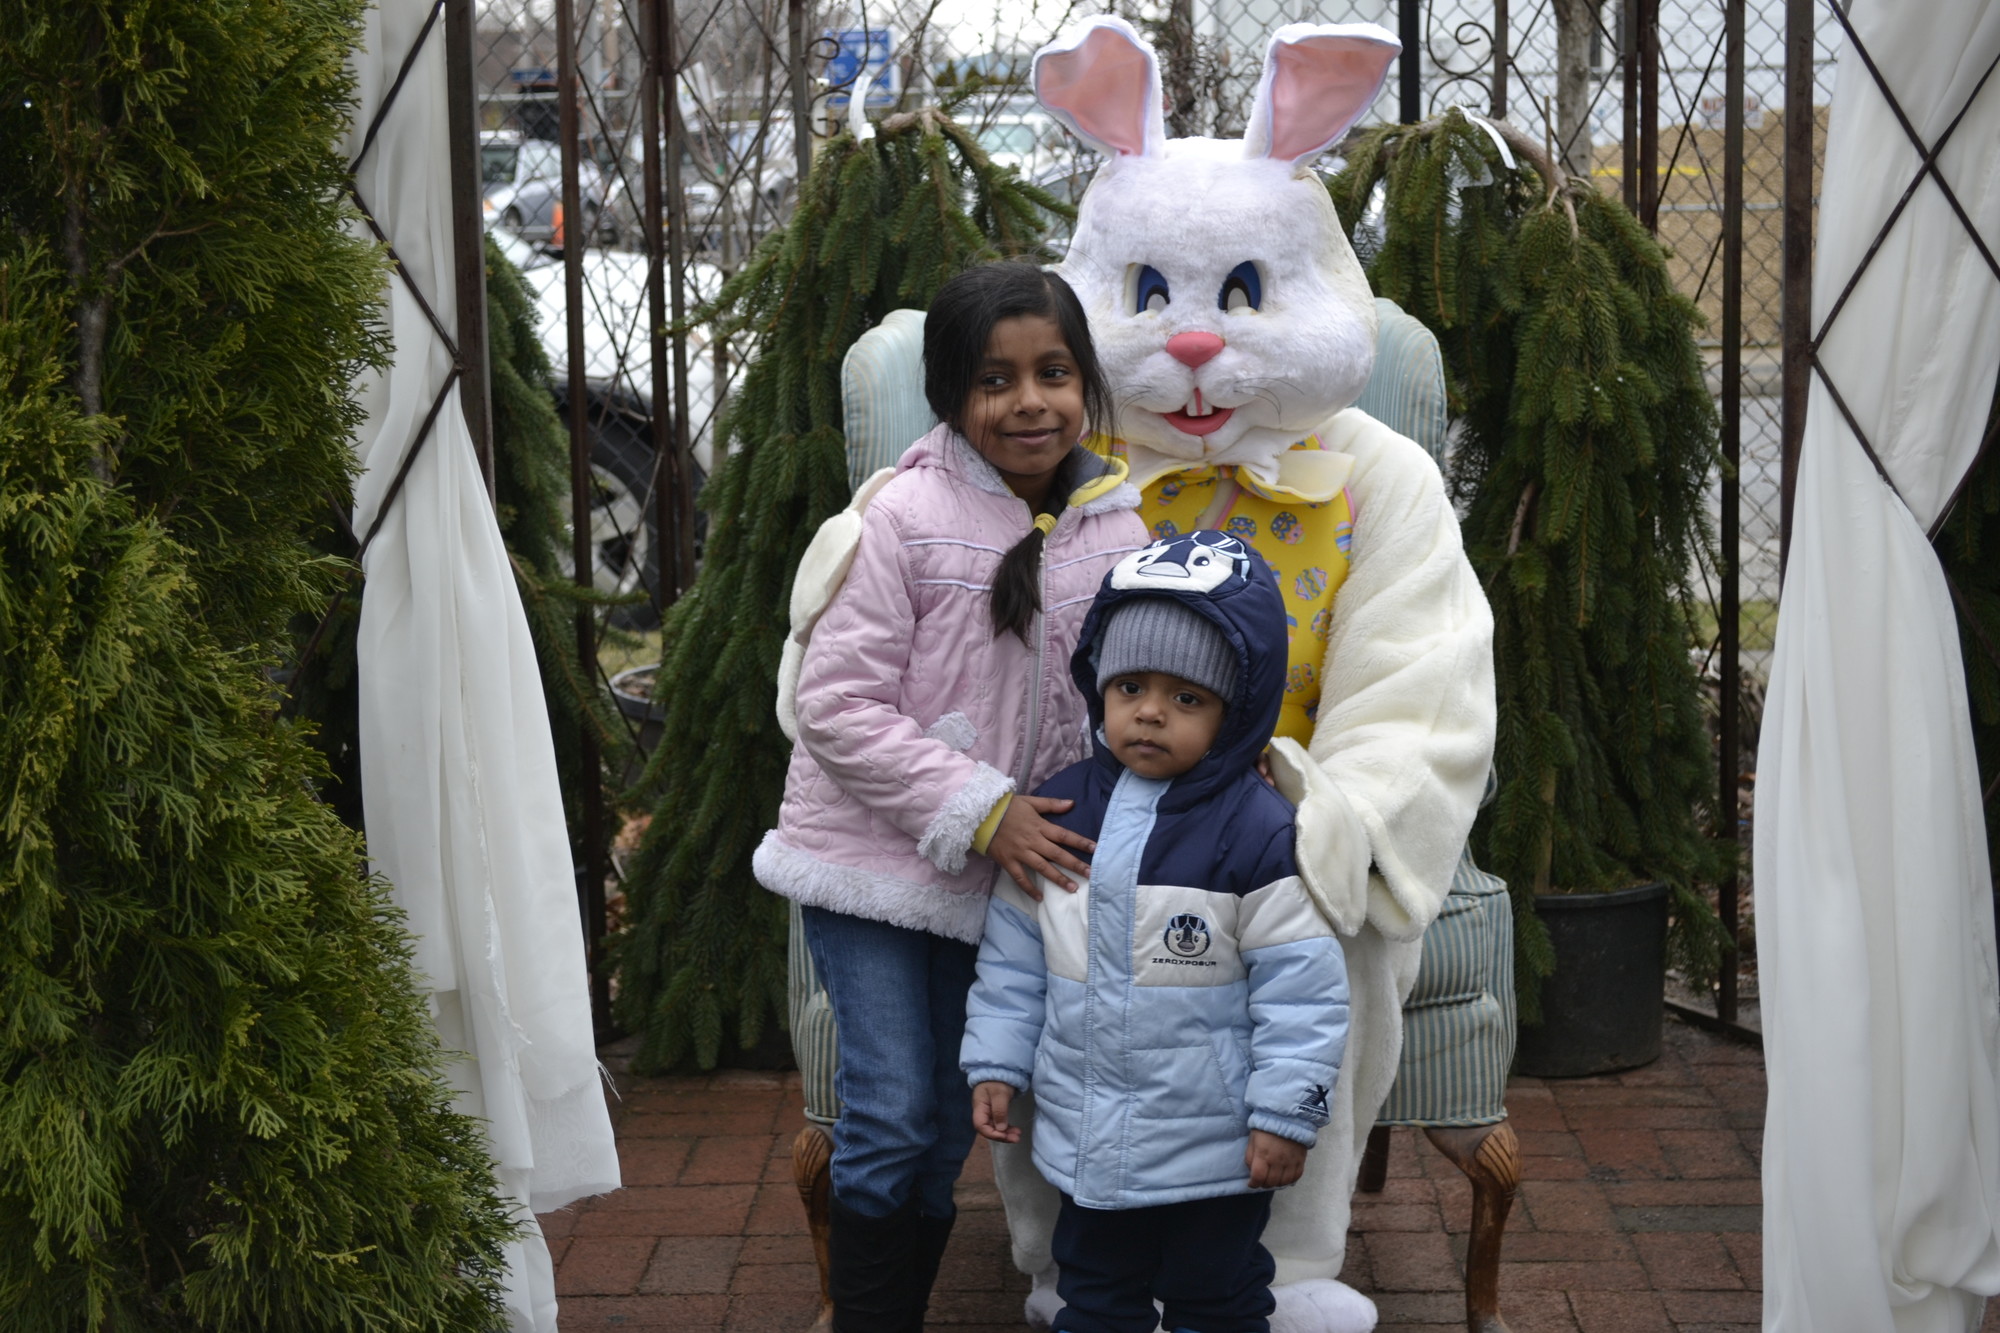 Varsha and Ash Ramrookum didn’t miss out on an opportunity to pose with the Easter Bunny.